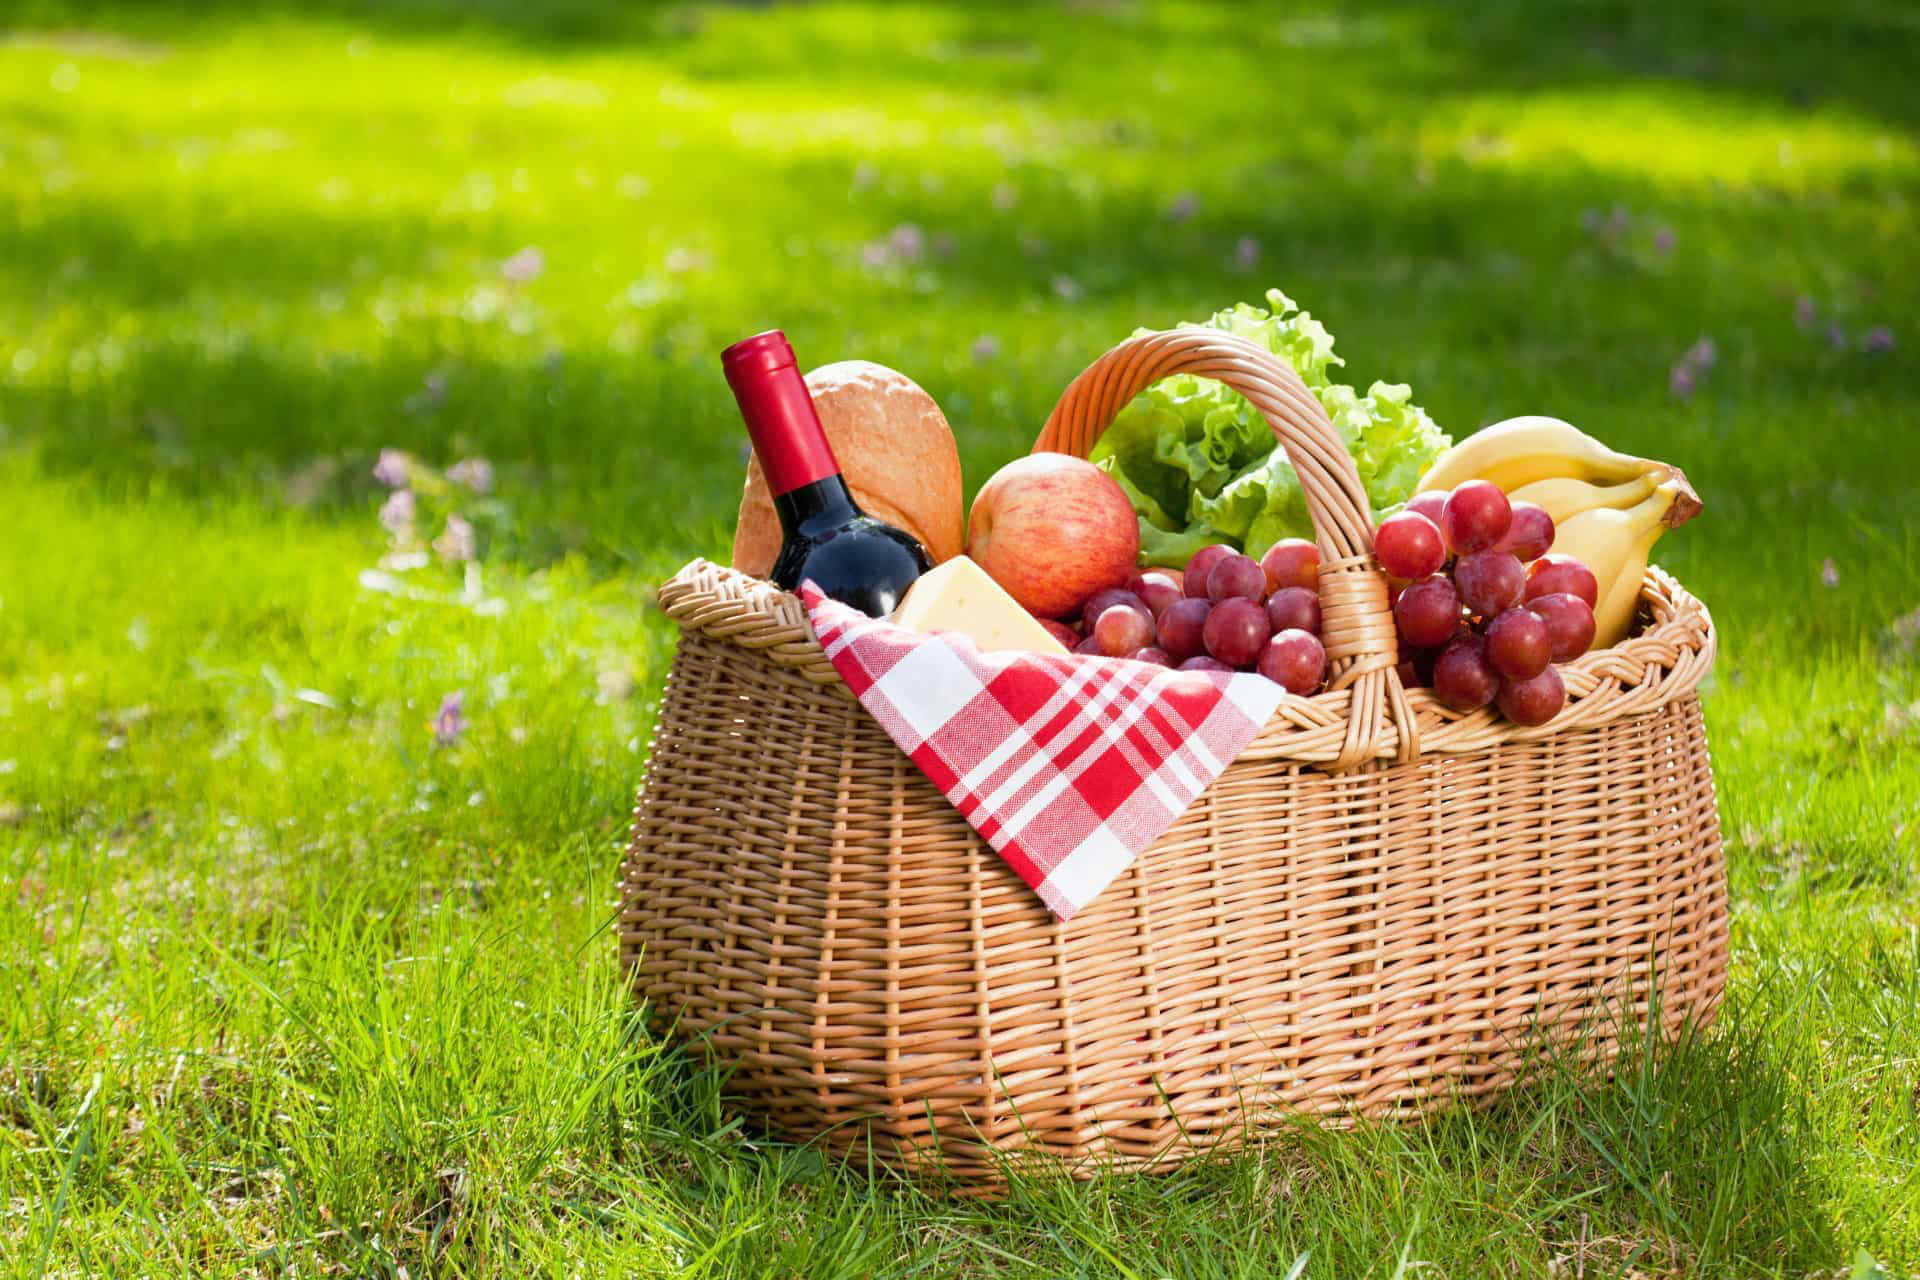 What goes into the ultimate picnic basket?